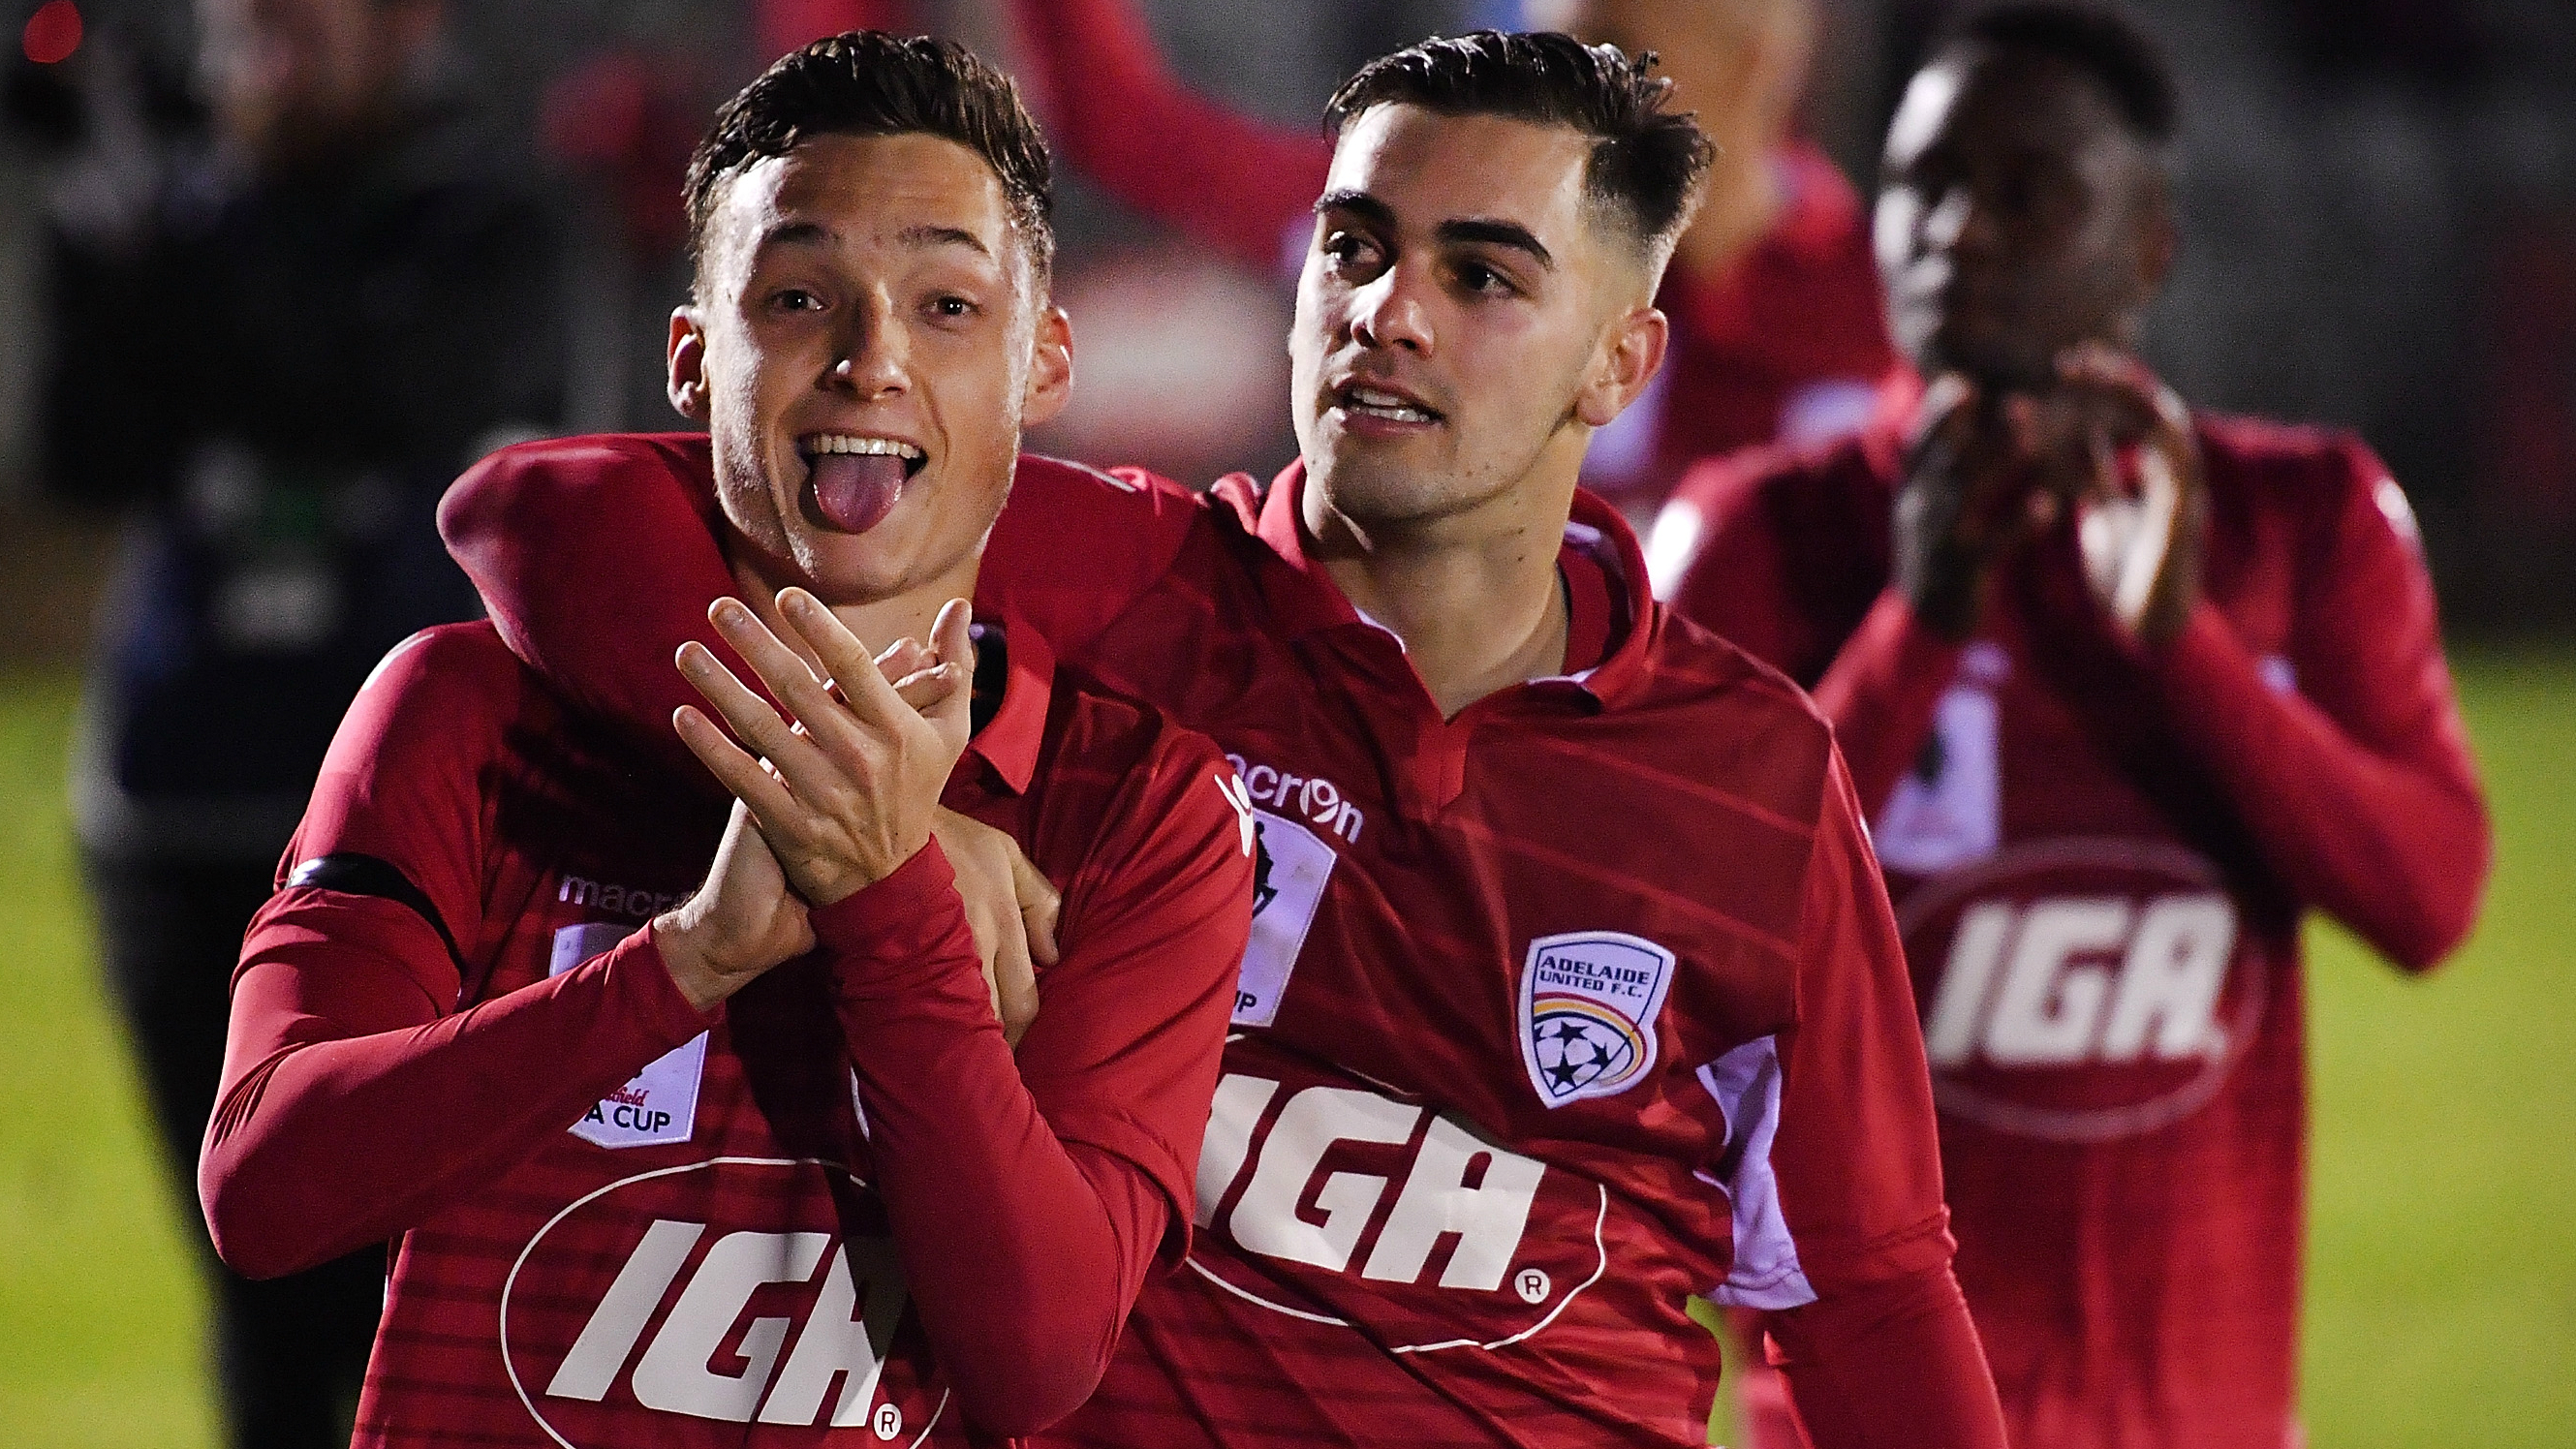 Adelaide United players Jordan O'Doherty and Ben Garuccio thank the fans after their win over Melbourne Victory.